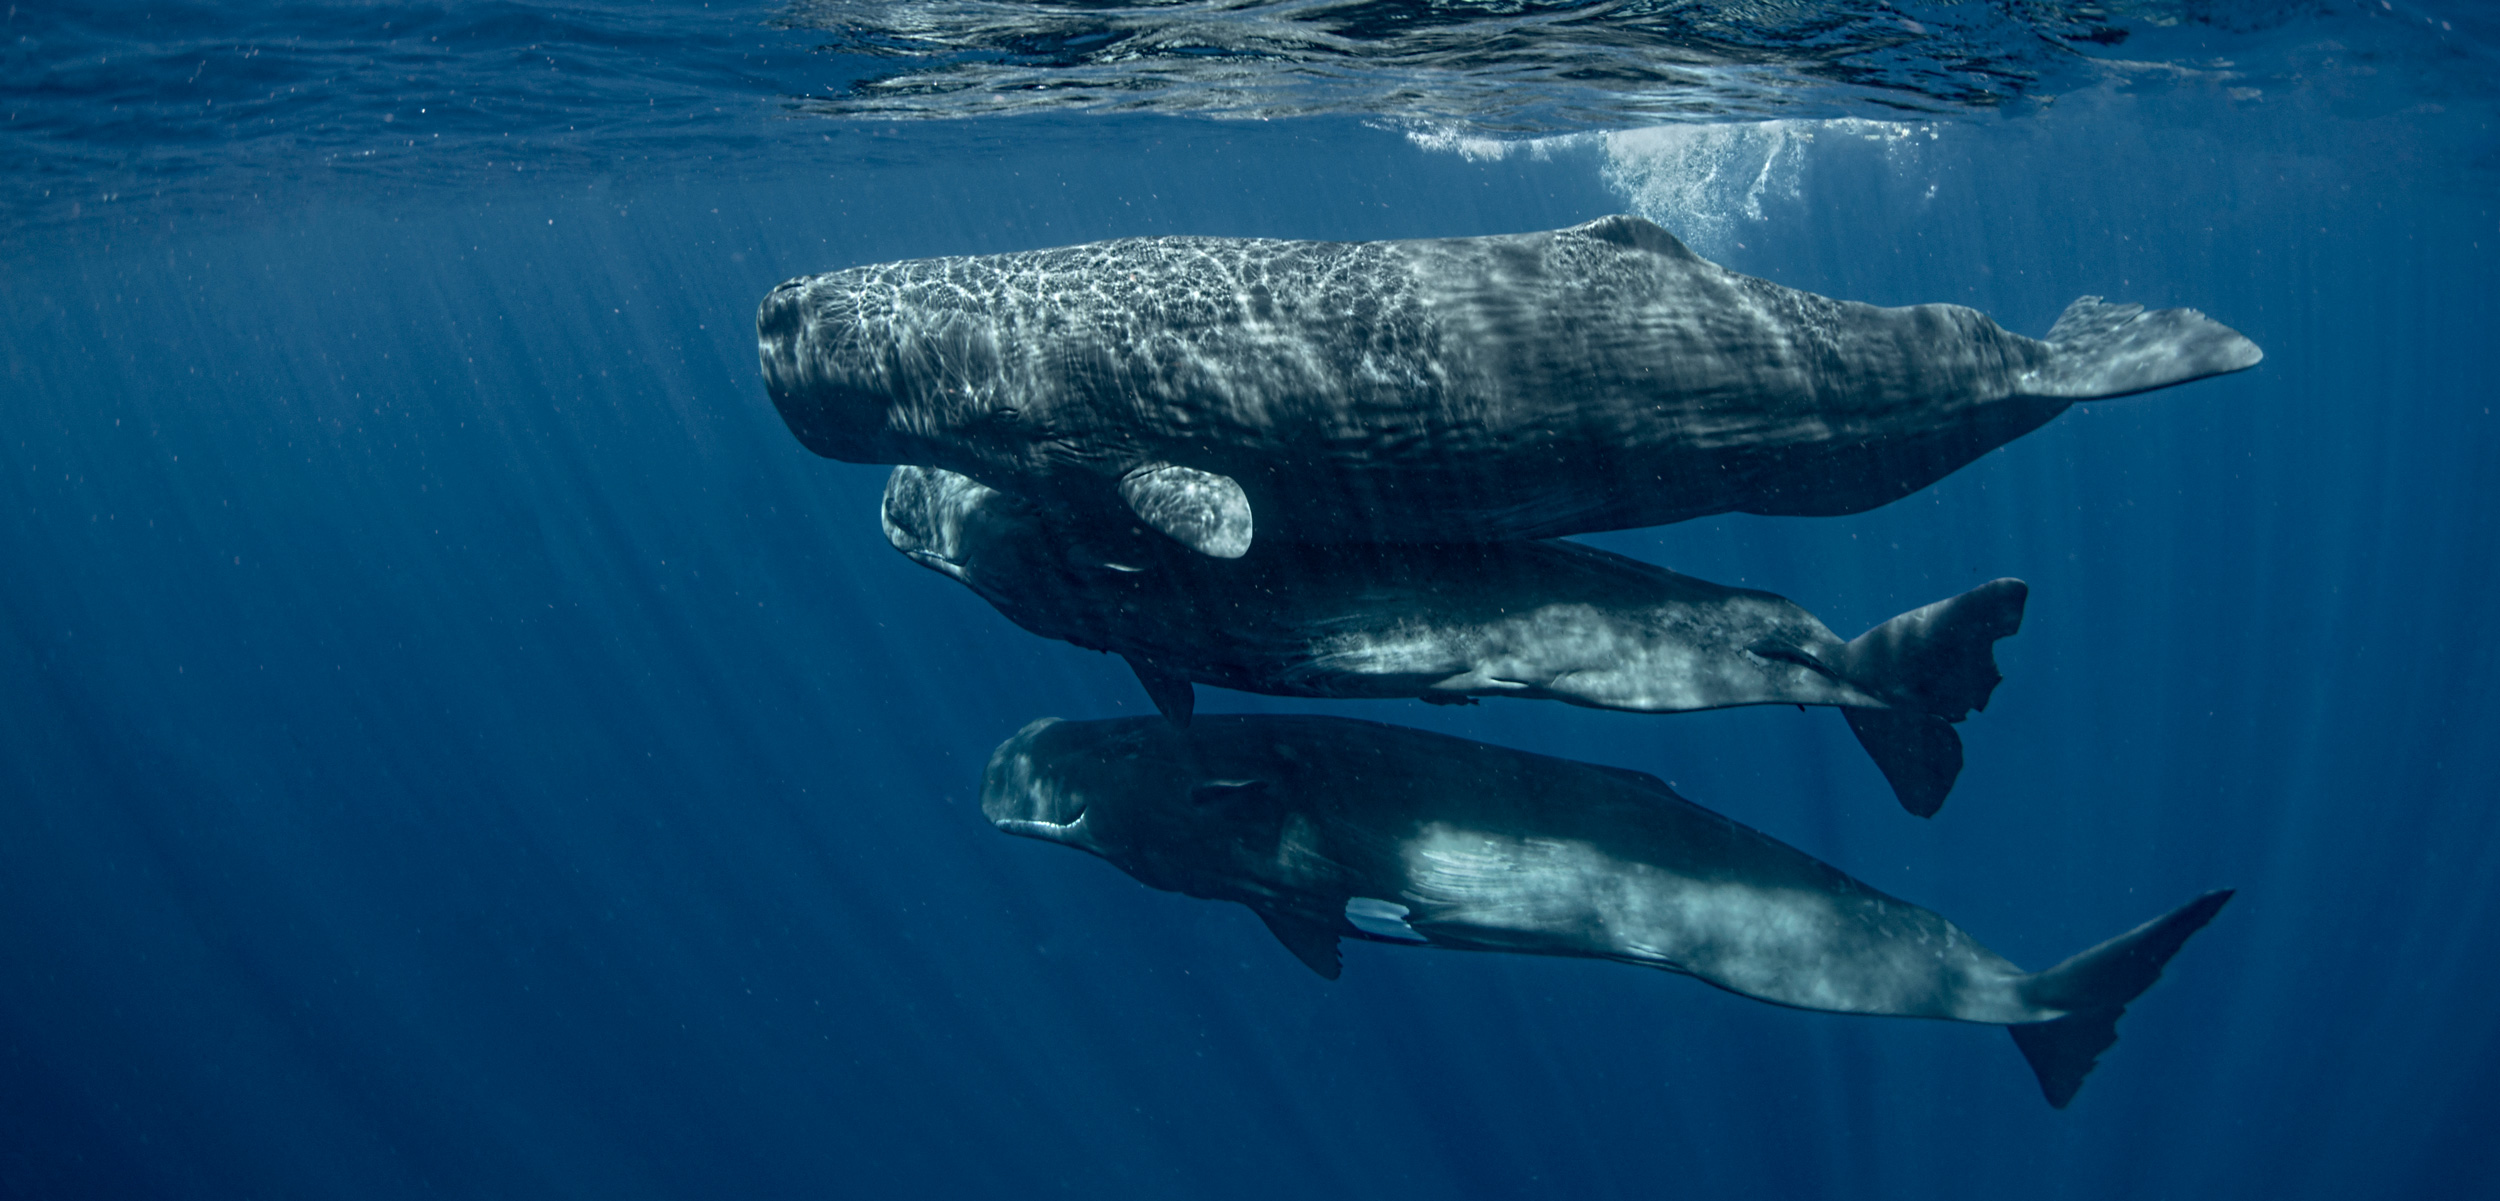 Are We on the Verge of Chatting with Whales? | Hakai Magazine